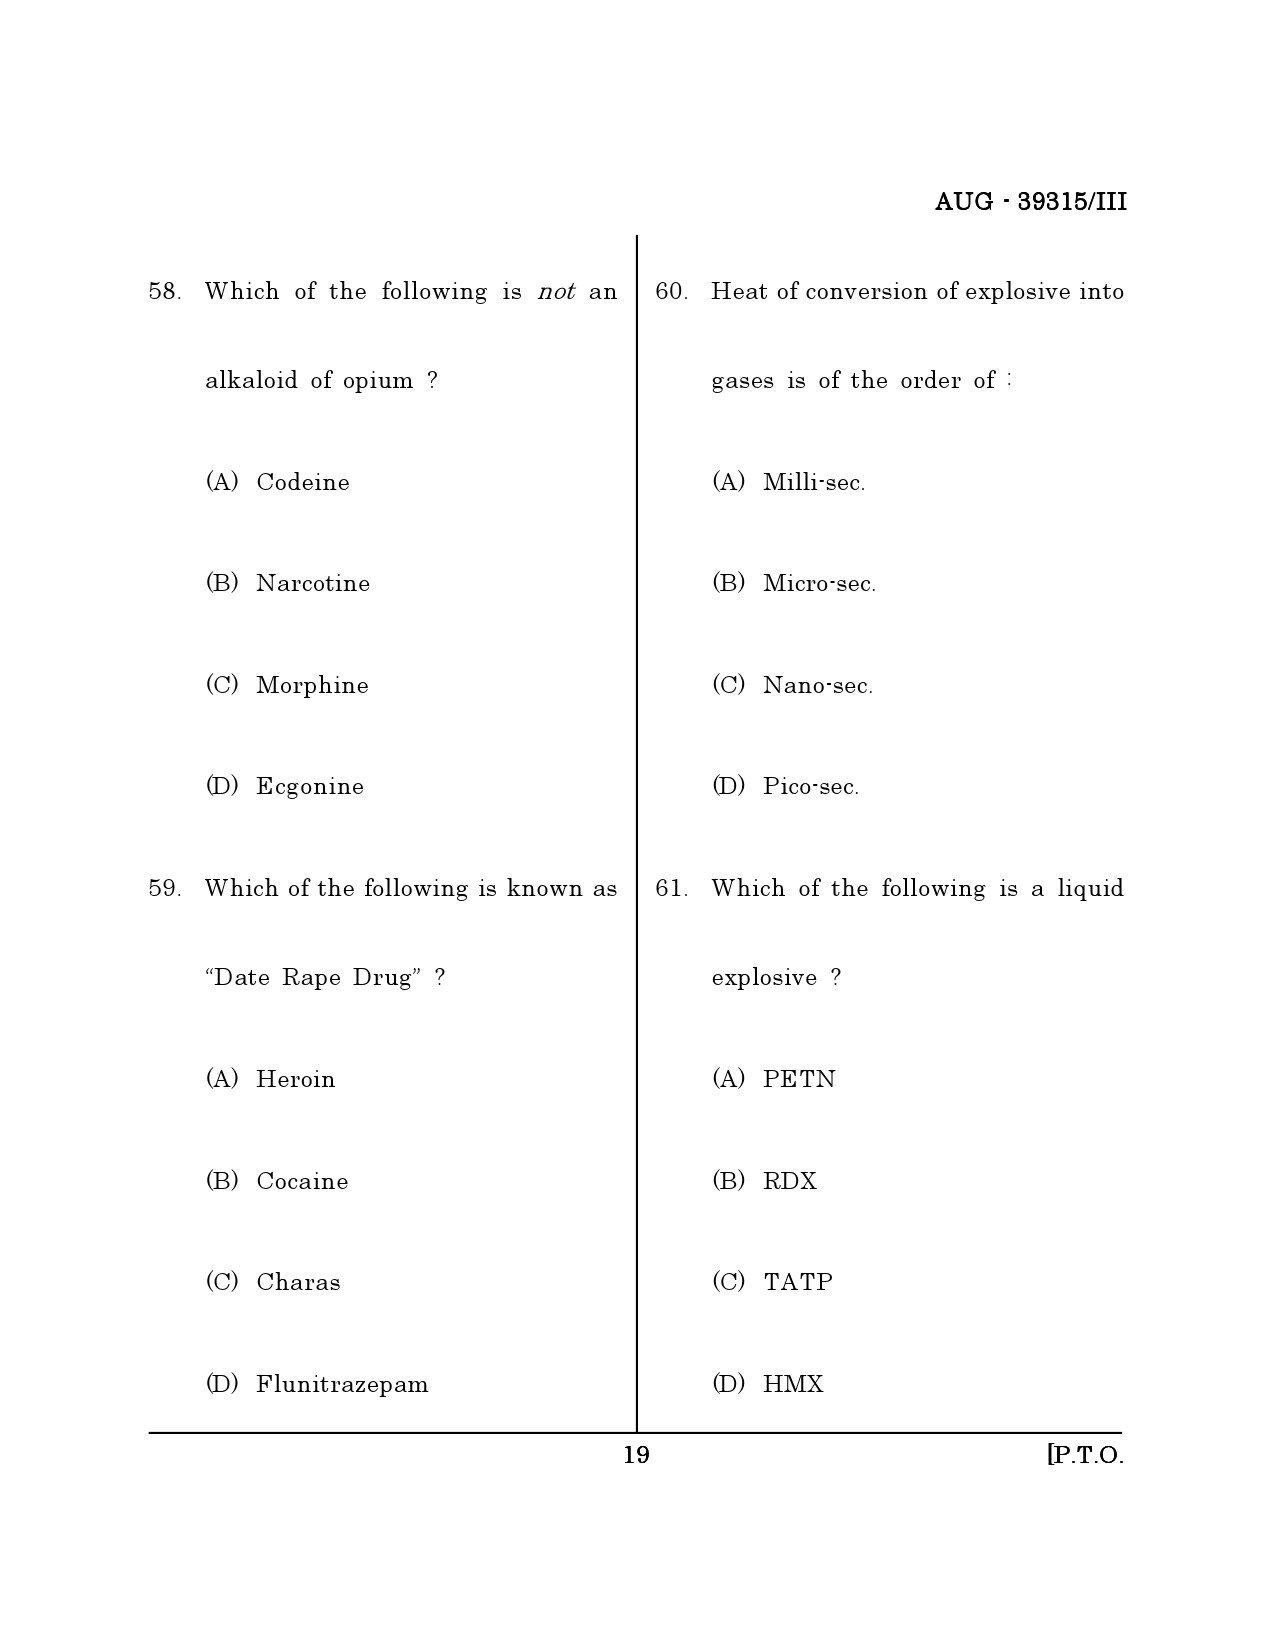 Maharashtra SET Forensic Science Question Paper III August 2015 18